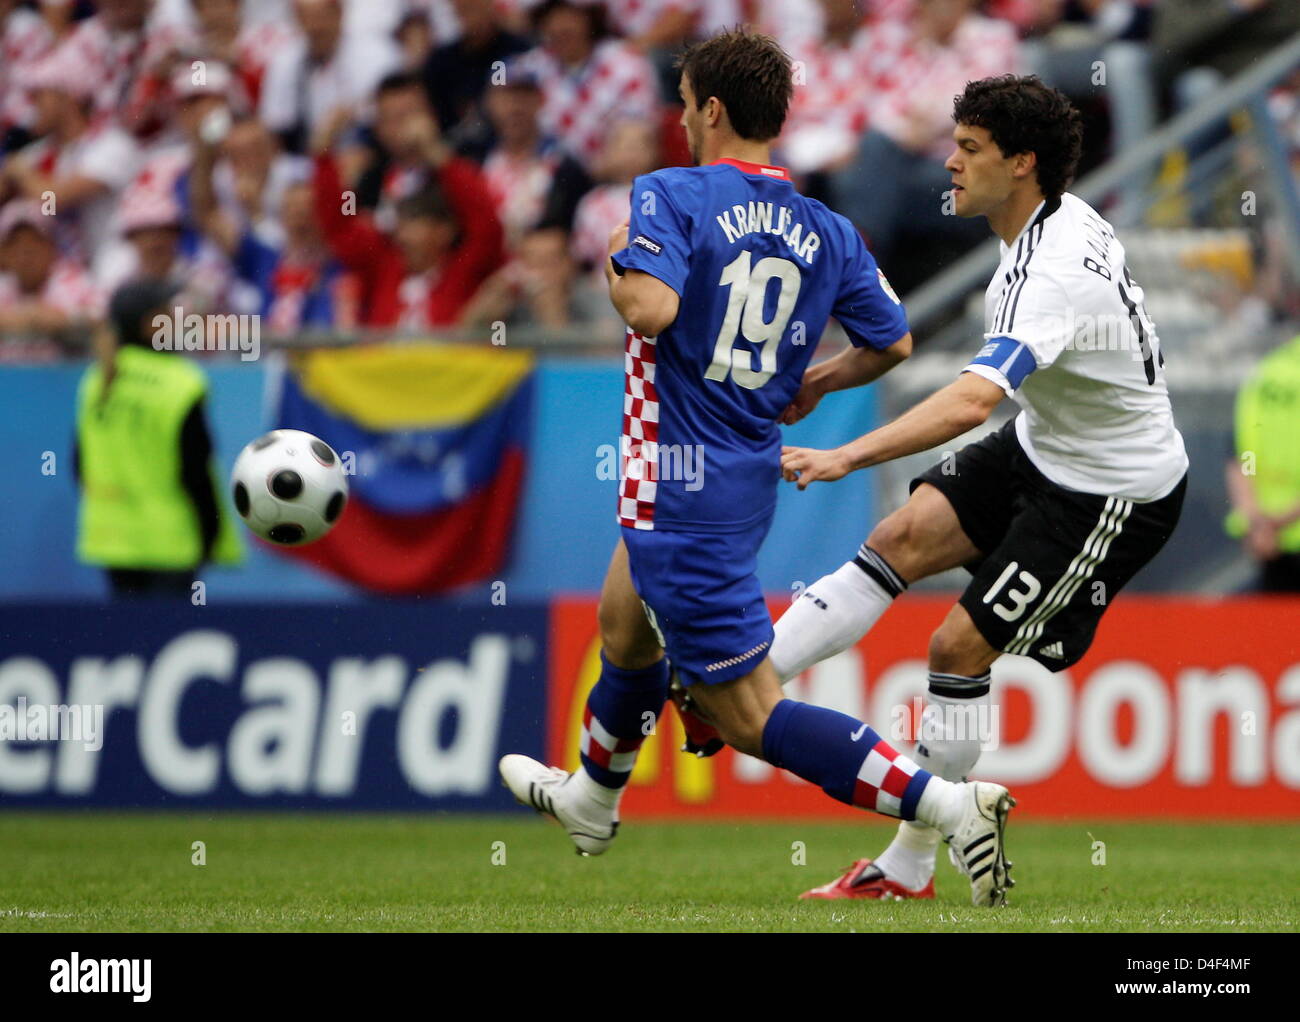 Niko Kranjcar (L) of Croatia vies with Michael Ballack (R) of Germany during the UEFA EURO 2008 Group B preliminary round match between Croatia and Germany at the Woerthersee stadium in Klagenfurt, Austria, 12 June 2008. Photo: Oliver Berg dpa +please note UEFA restrictions particulary in regard to slide shows and 'No Mobile Services'+ +++(c) dpa - Bildfunk+++ Stock Photo